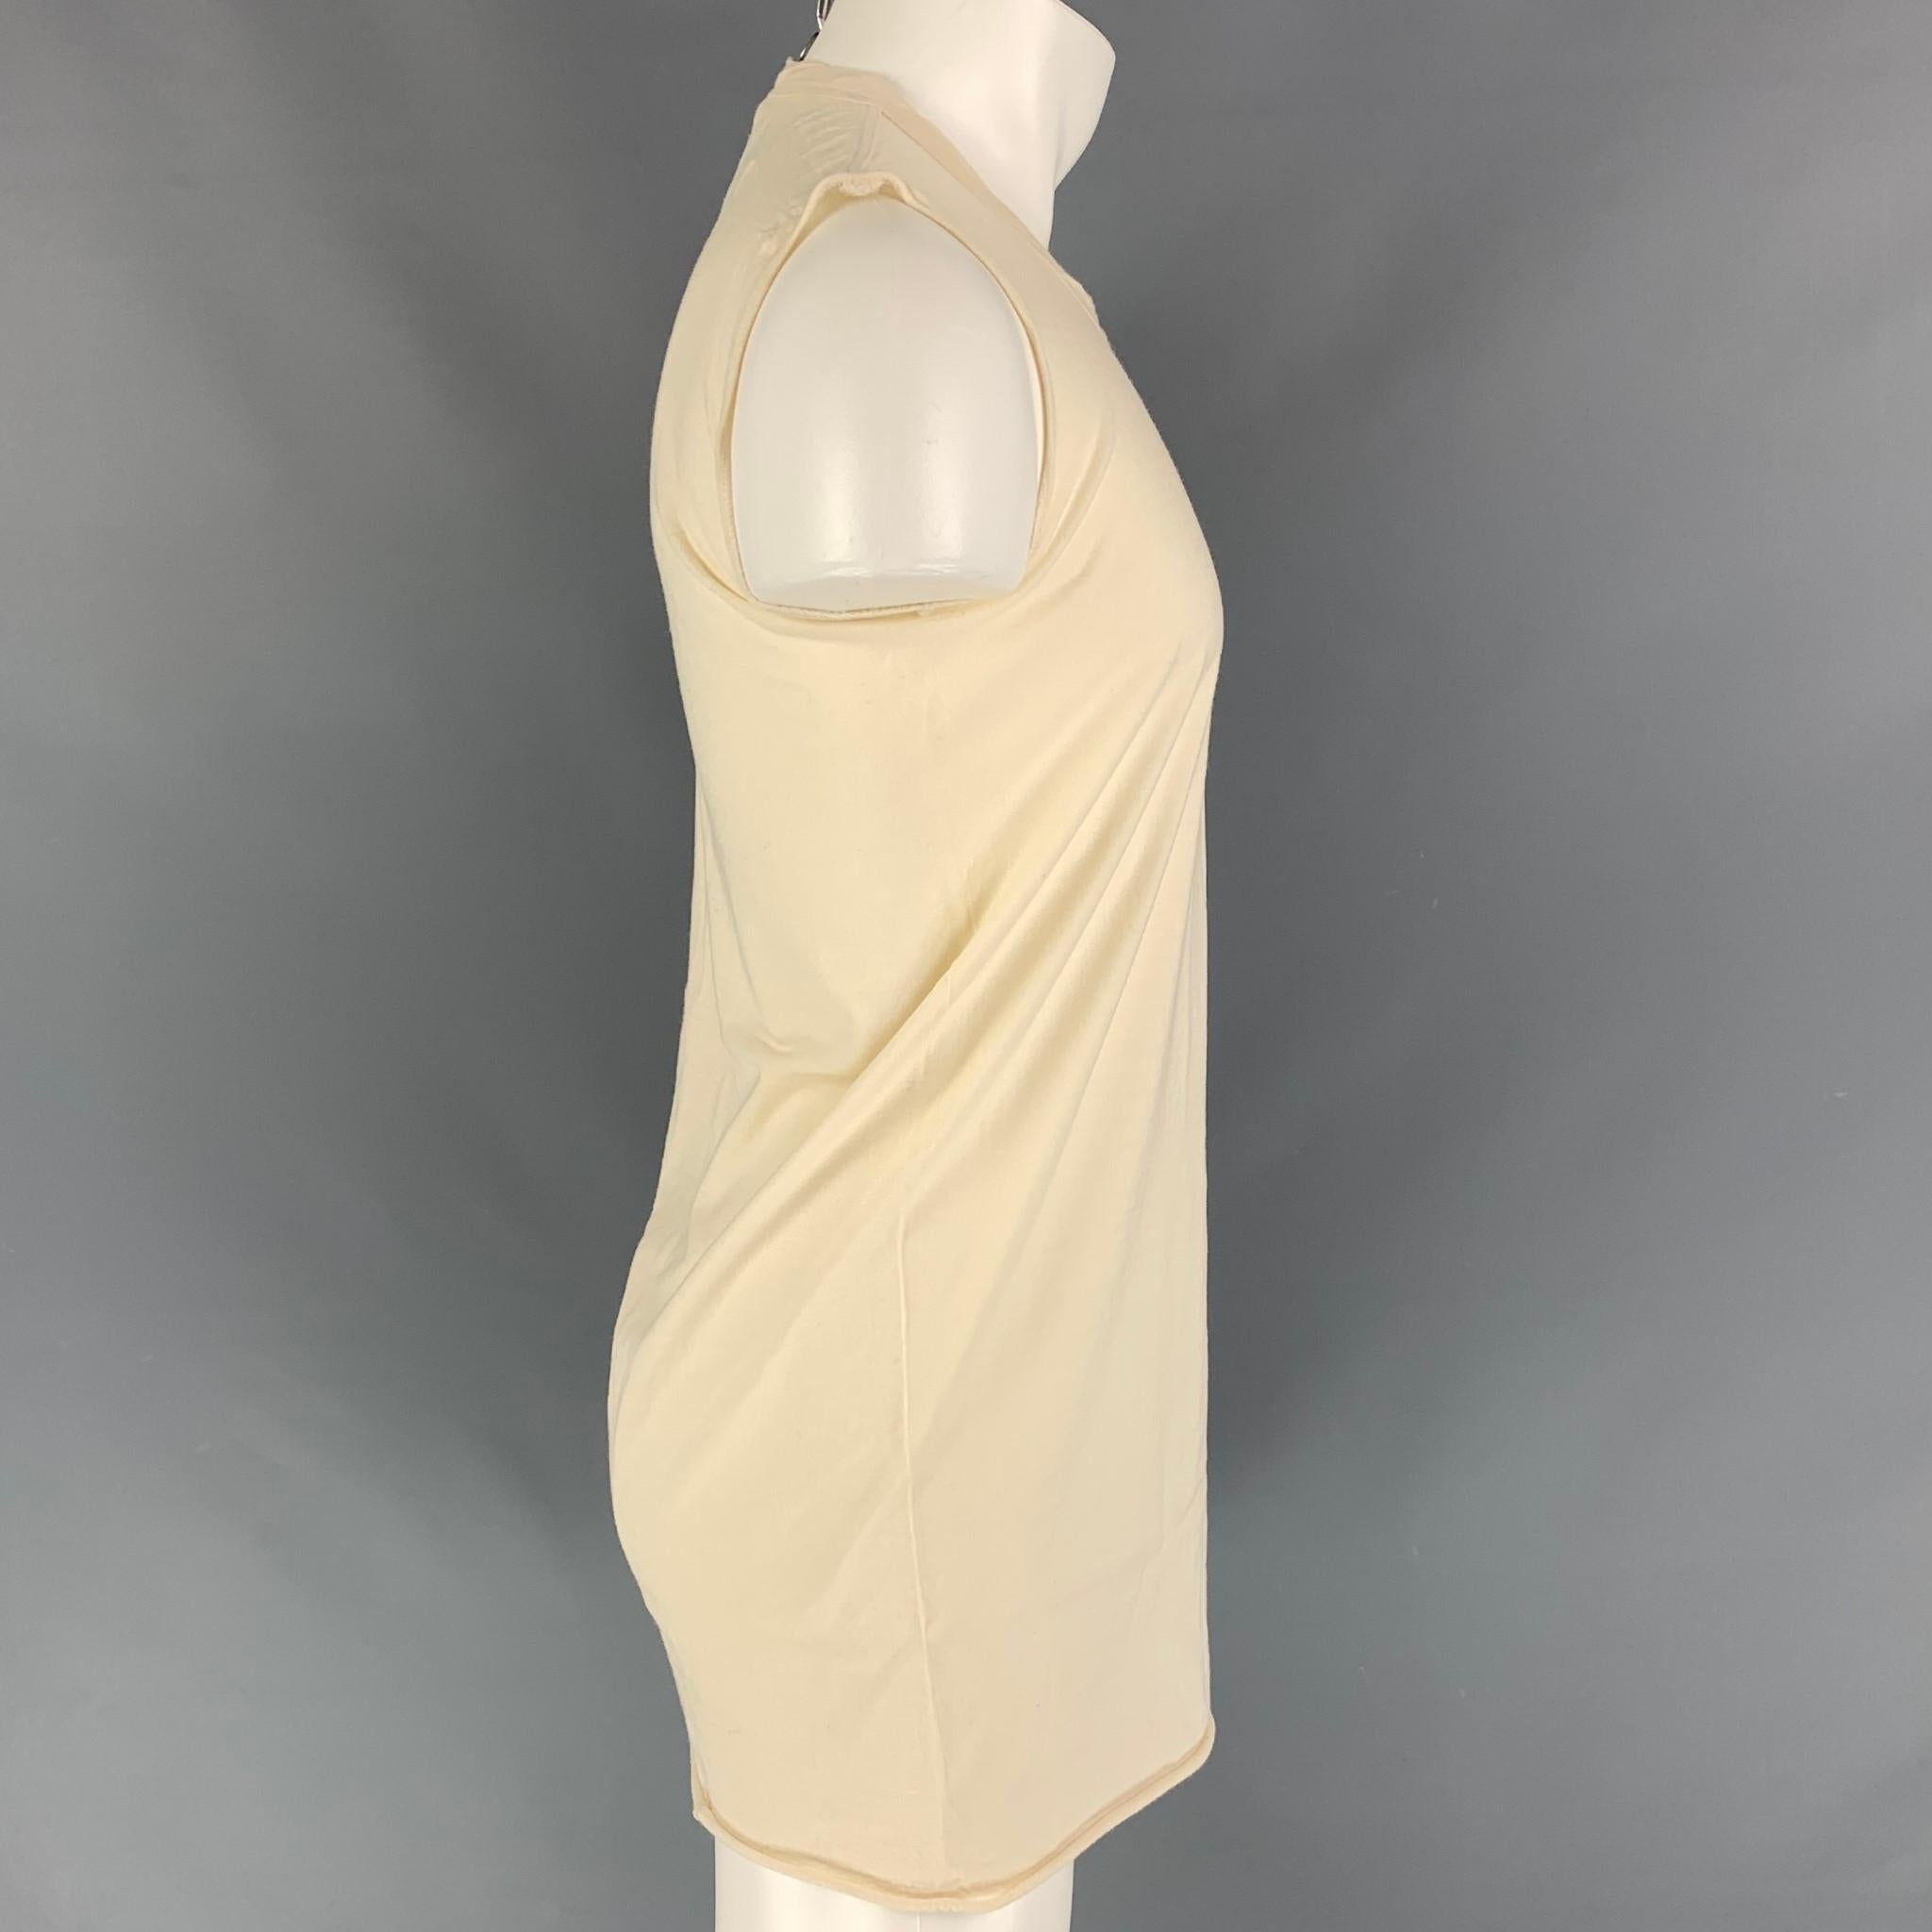 RICK OWENS FW 15 'SPHINX' long t-shirt comes in a beige material featuring a sleeveless style and a crew-neck. 

Very Good Pre-Owned Condition. Fabric tag removed.
Marked: Size tag removed.

Measurements:

Shoulder: 15 in.
Chest: 36 in.
Length: 32.5